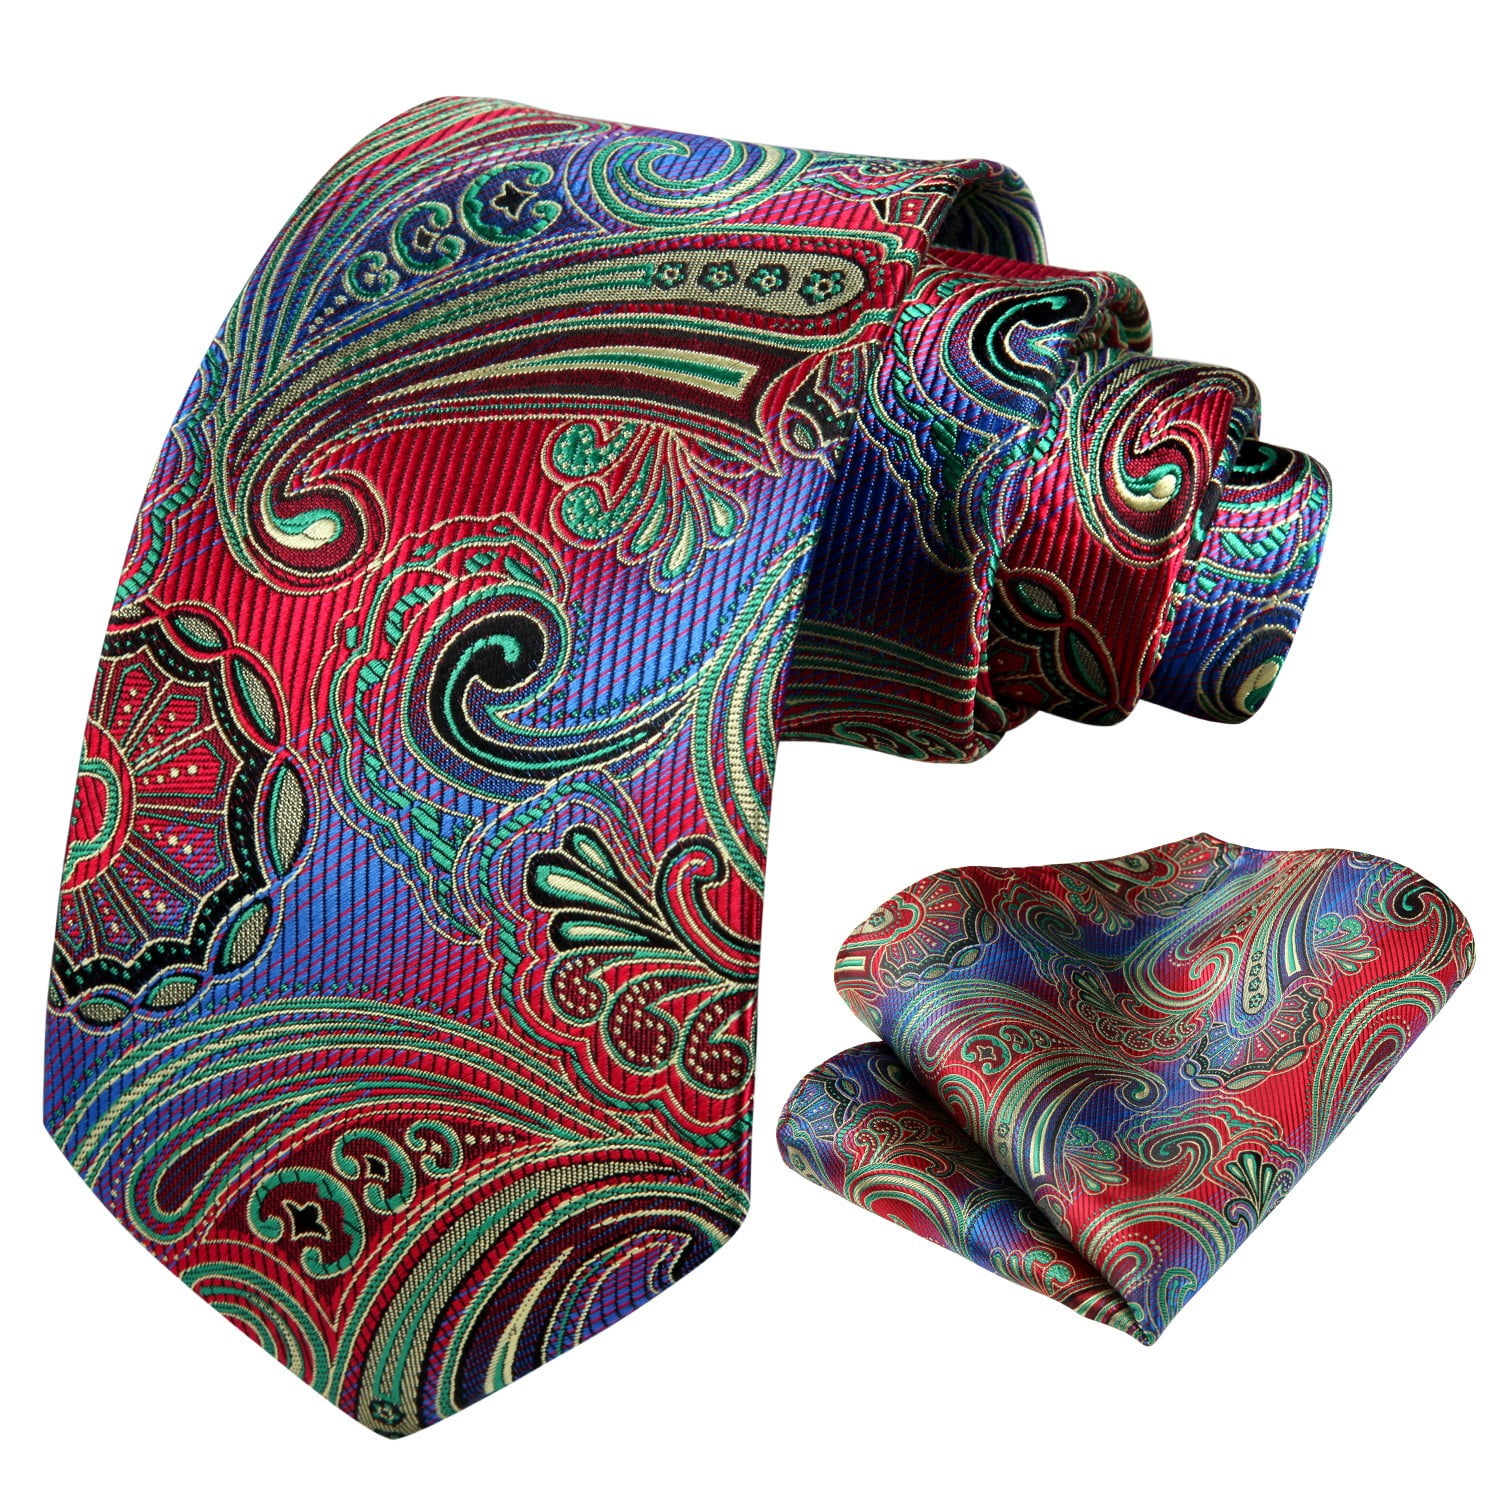 HISDERN Ties for Men Paisley Floral Tie and Pocket Square Woven Classic ...